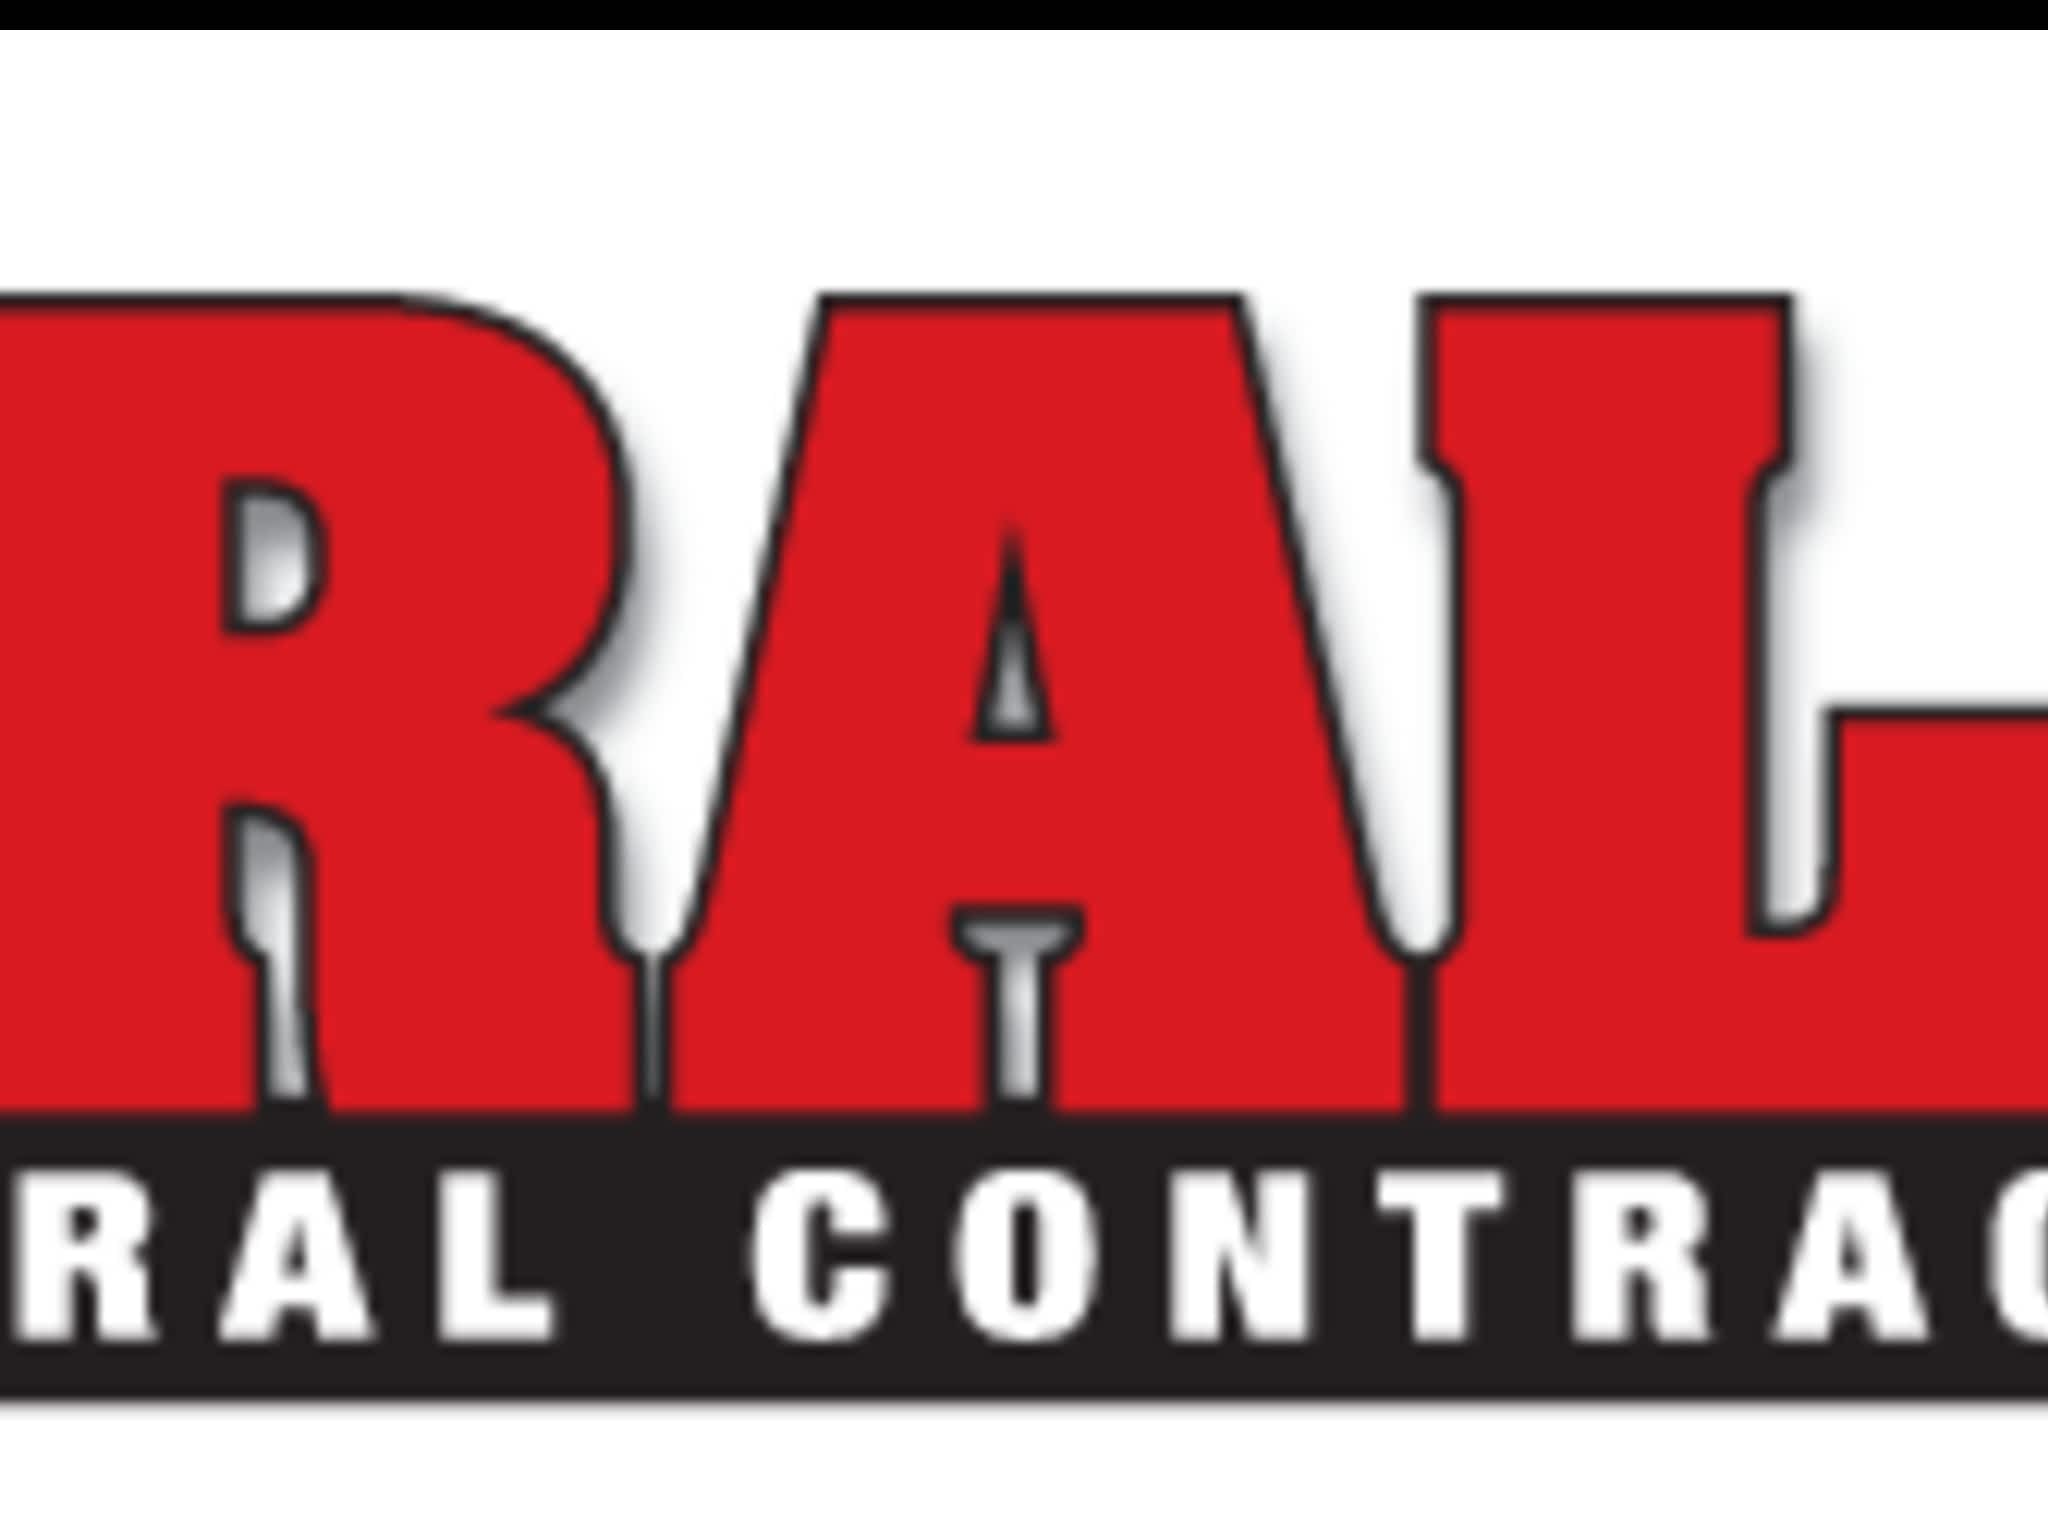 photo Gerald's General Contracting